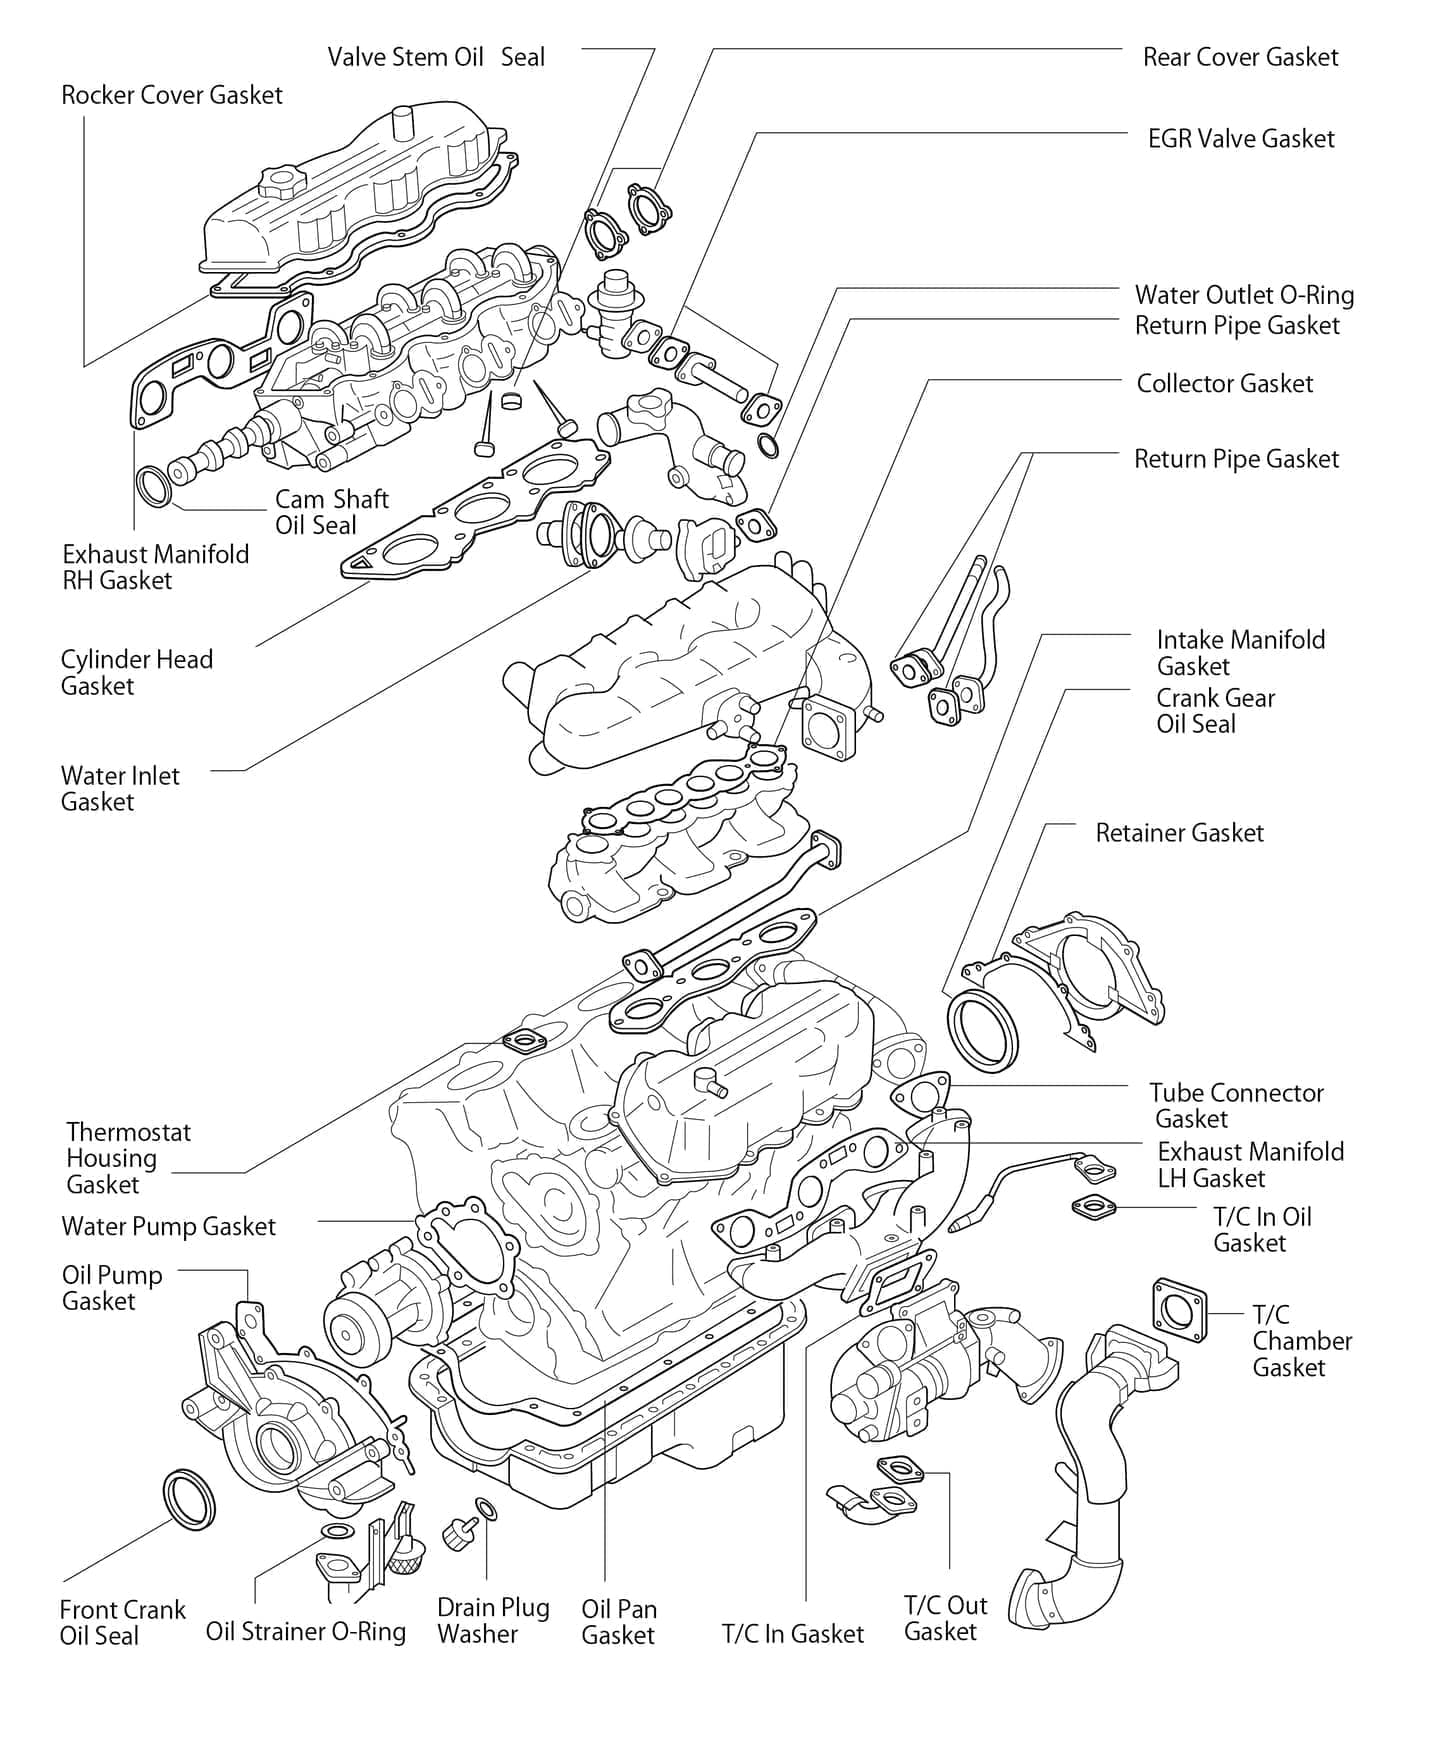 Where to use Stone gaskets in the engine